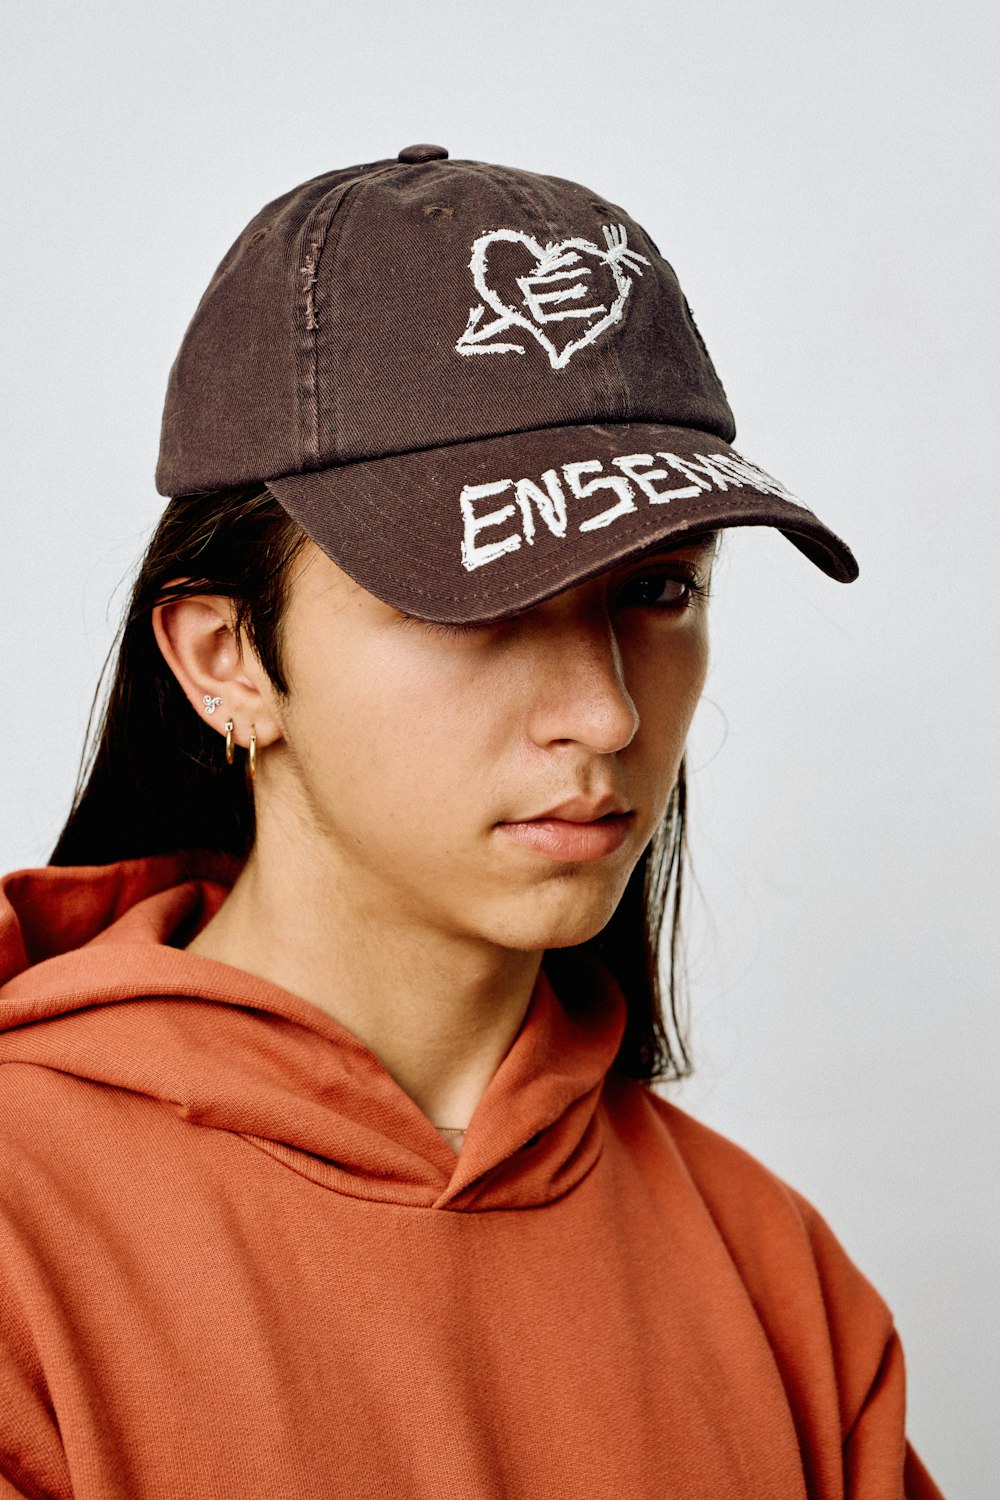 a woman wearing a brown hat with white writing on it